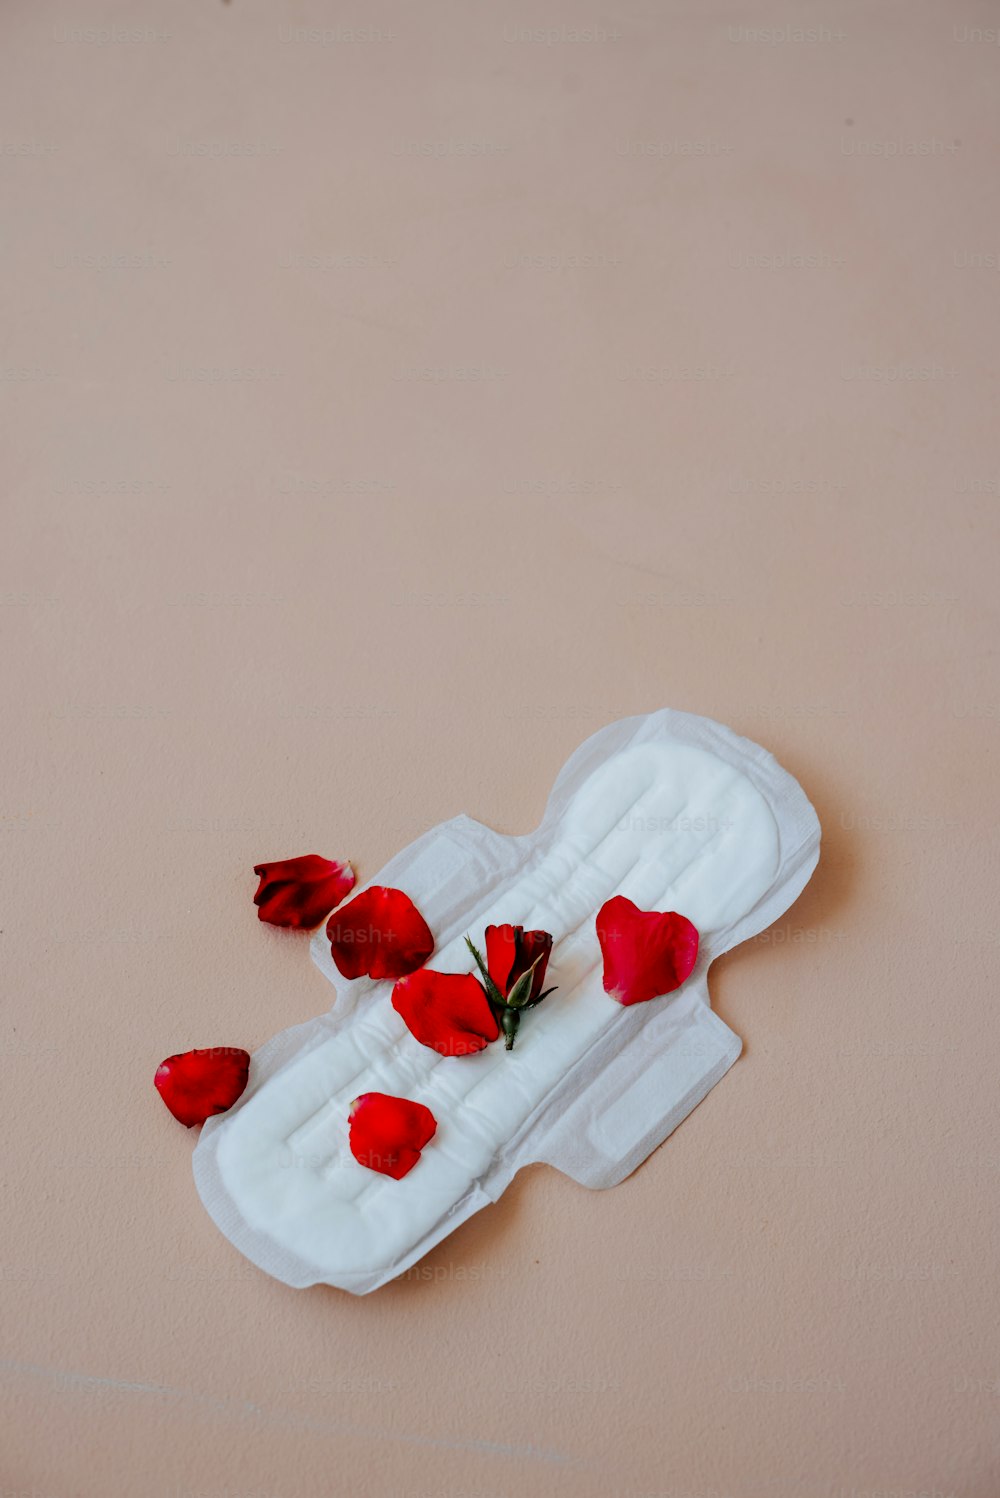 a white object with red flowers on it